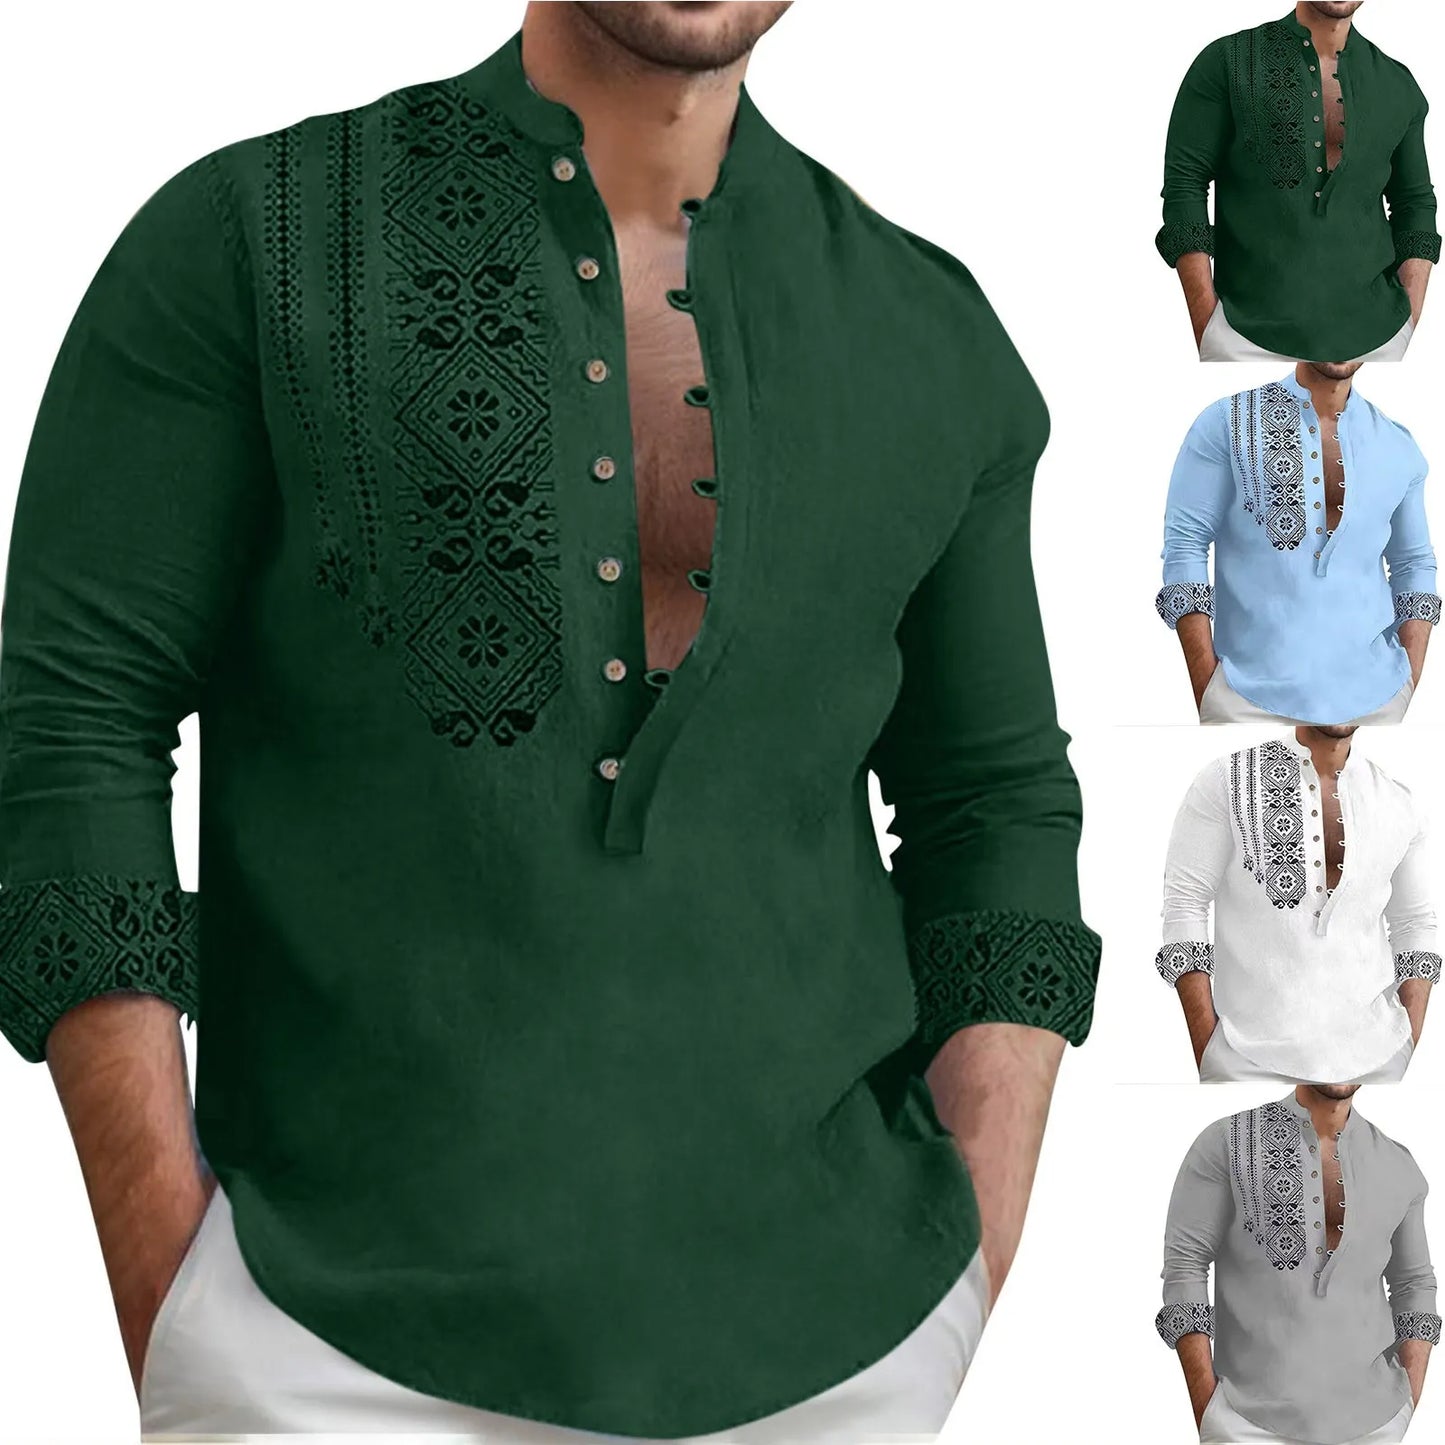 Men's Long-Sleeve Loose Fit Clothing - integrityhomedecor